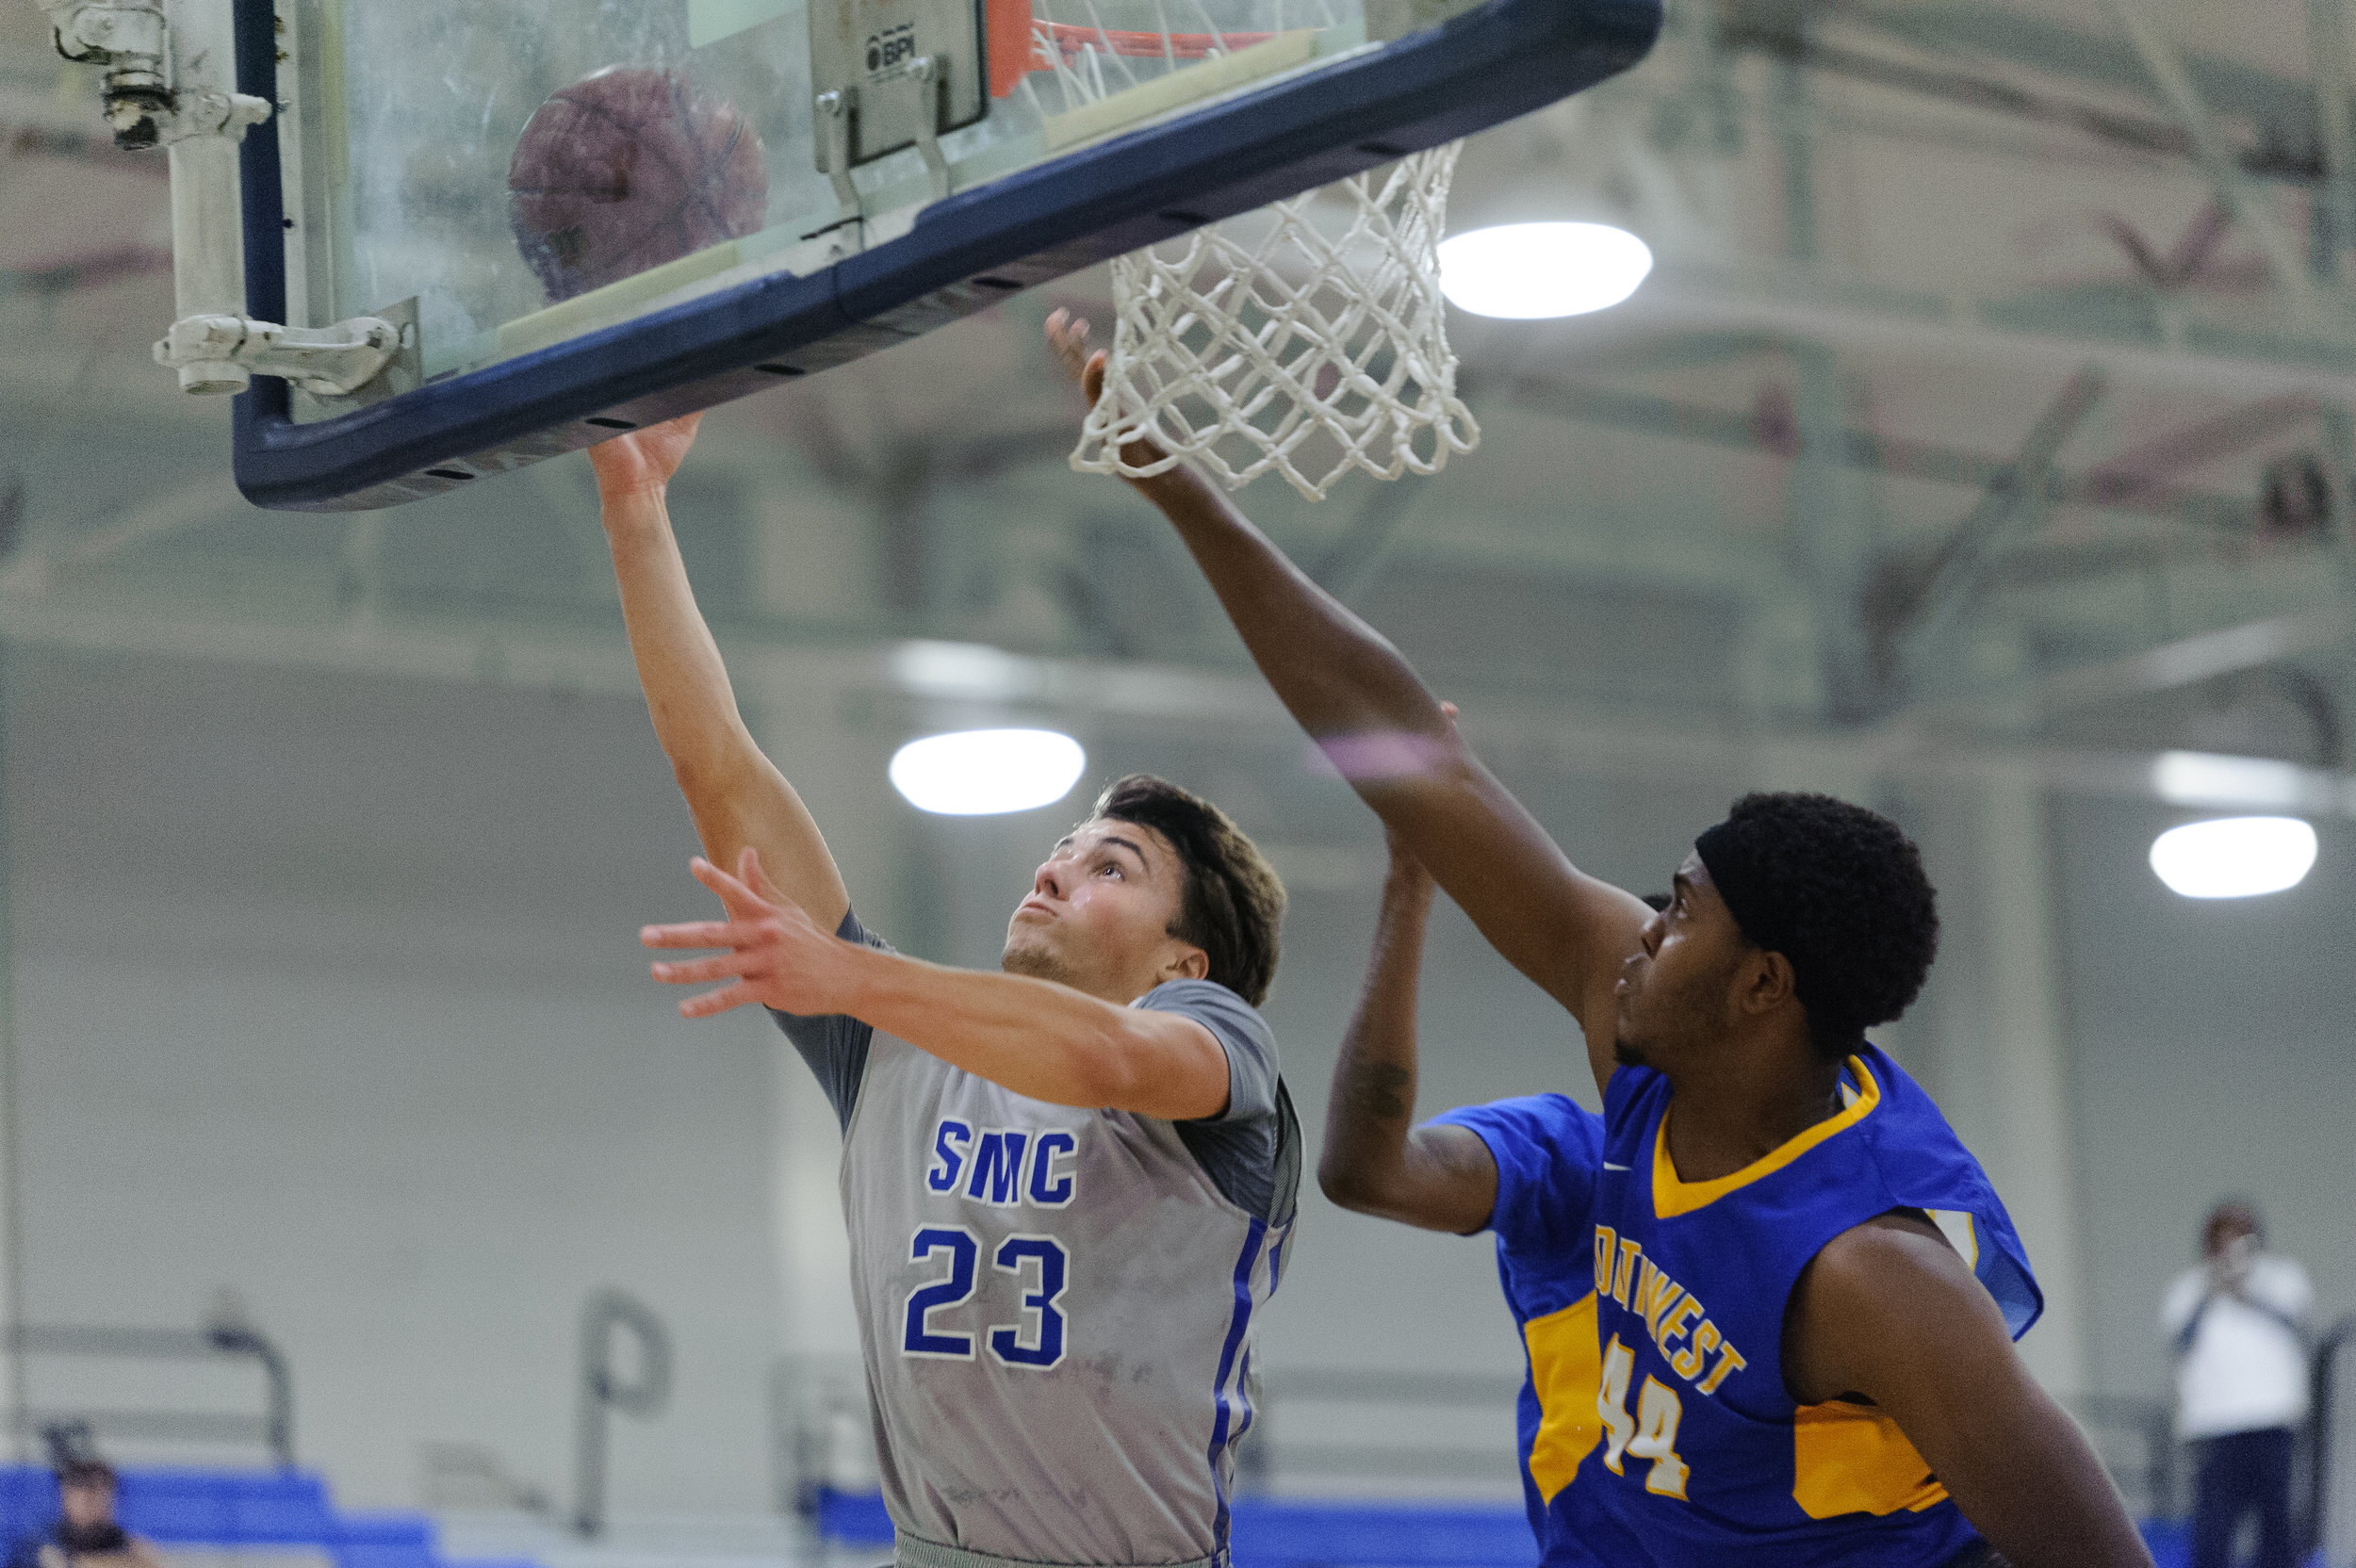  Forward Dayne Downey (23,Left) of Santa Monica College shoots a contested layup away from the outstretched hands of forward Malik Muhammad (44,Right) and guard D’Lano Beckles (3,Back) of Southwest College. The Santa Monica College Corsairs win their